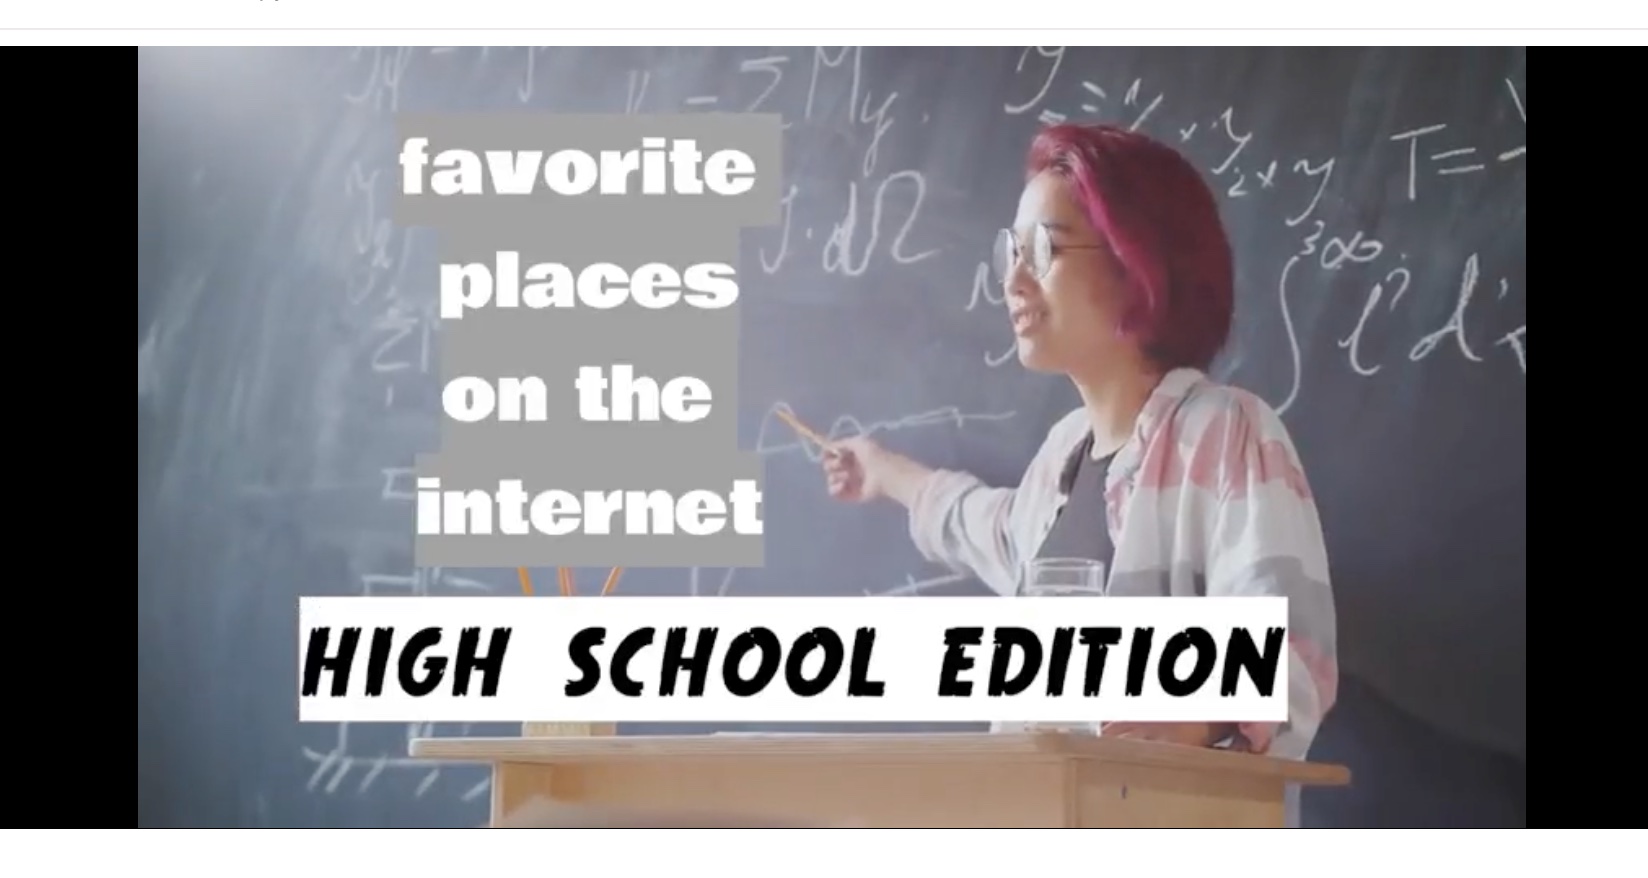 Screen shot from video featuring a teen pointing to a chalk board with text "favorite places on the internet, high school edition" 